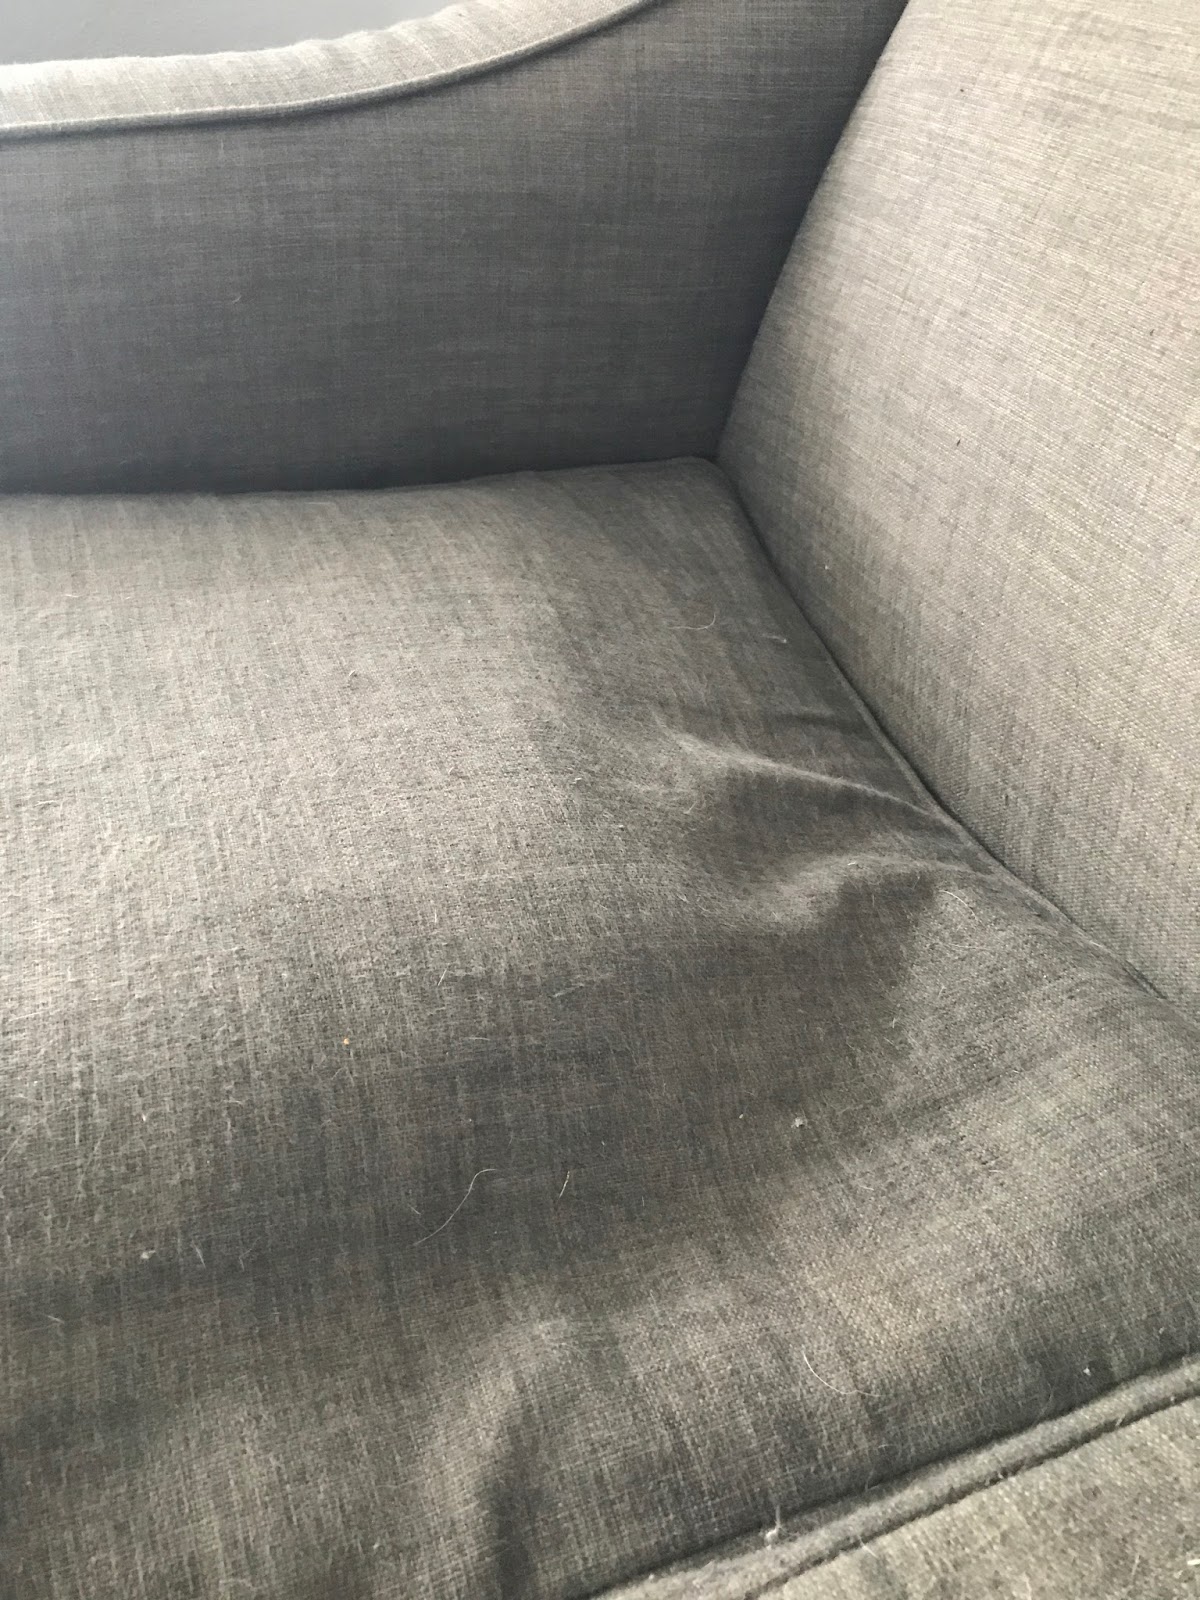 How to Restuff Couch Cushions and Bring Them Back to Life